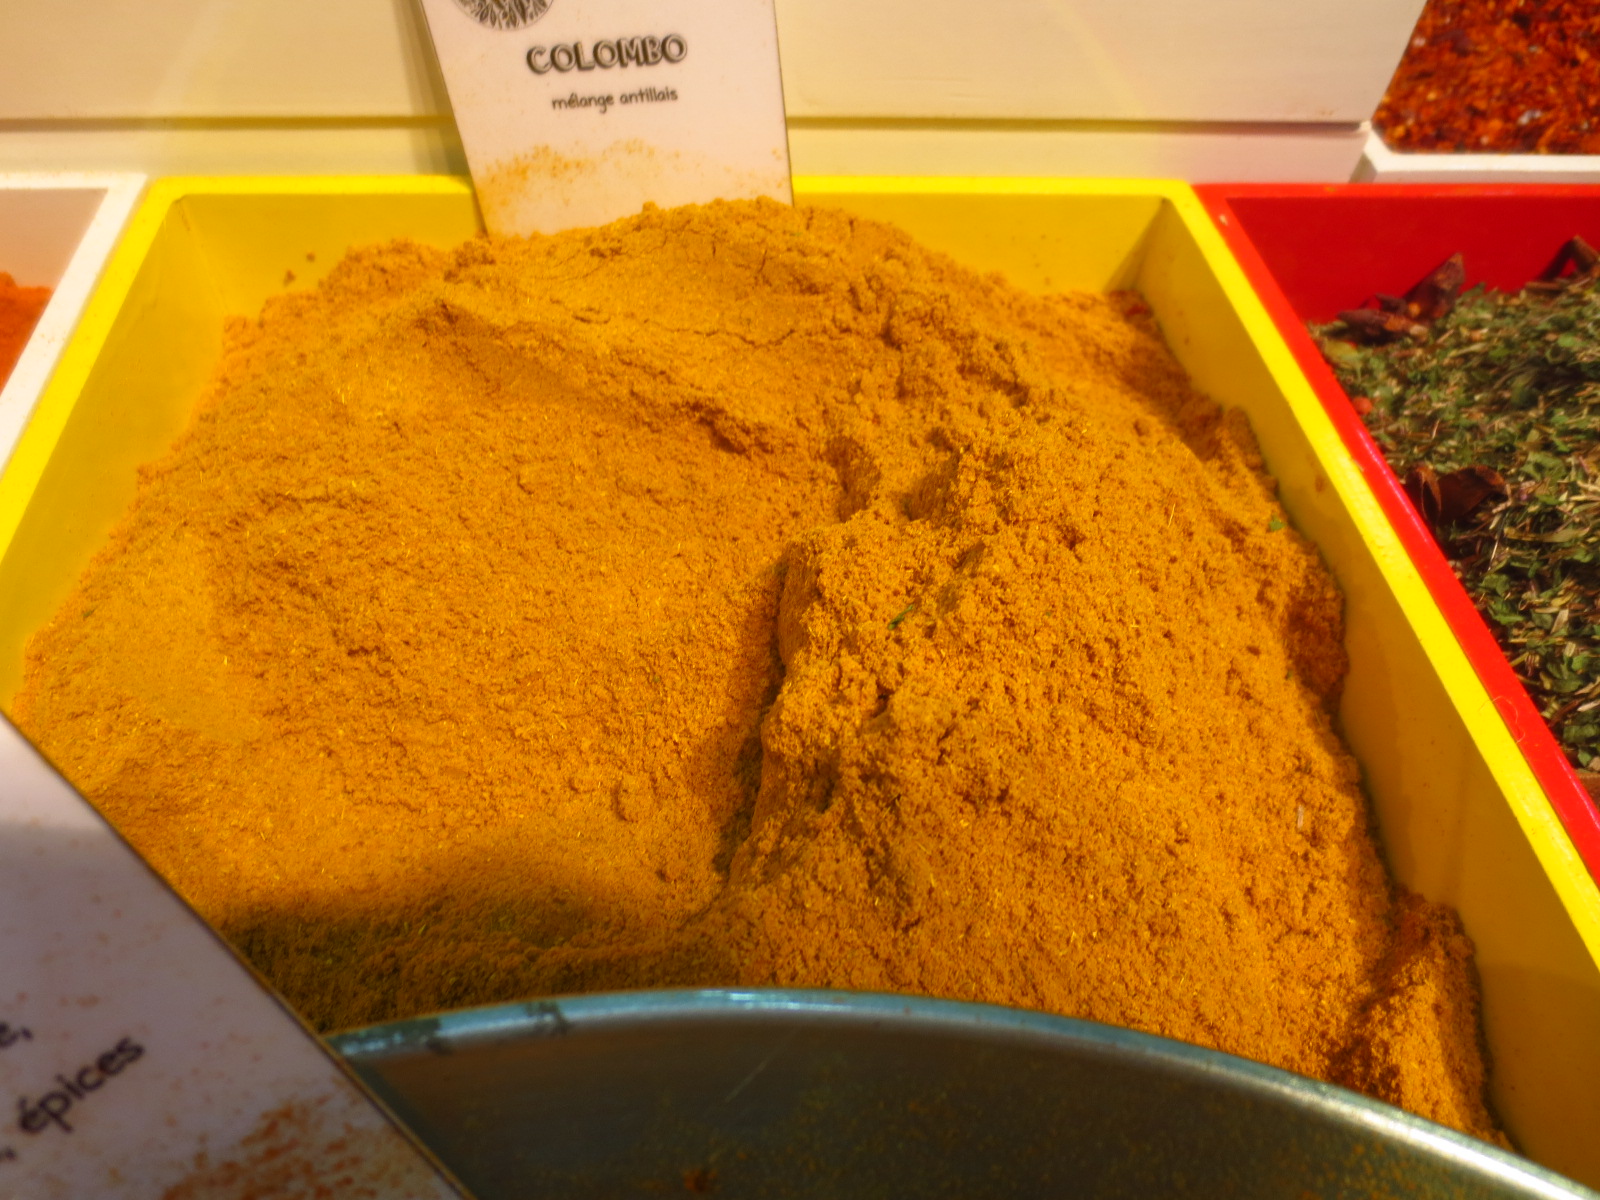 FIND OUT MORE ABOUT COLOMBO SPICES